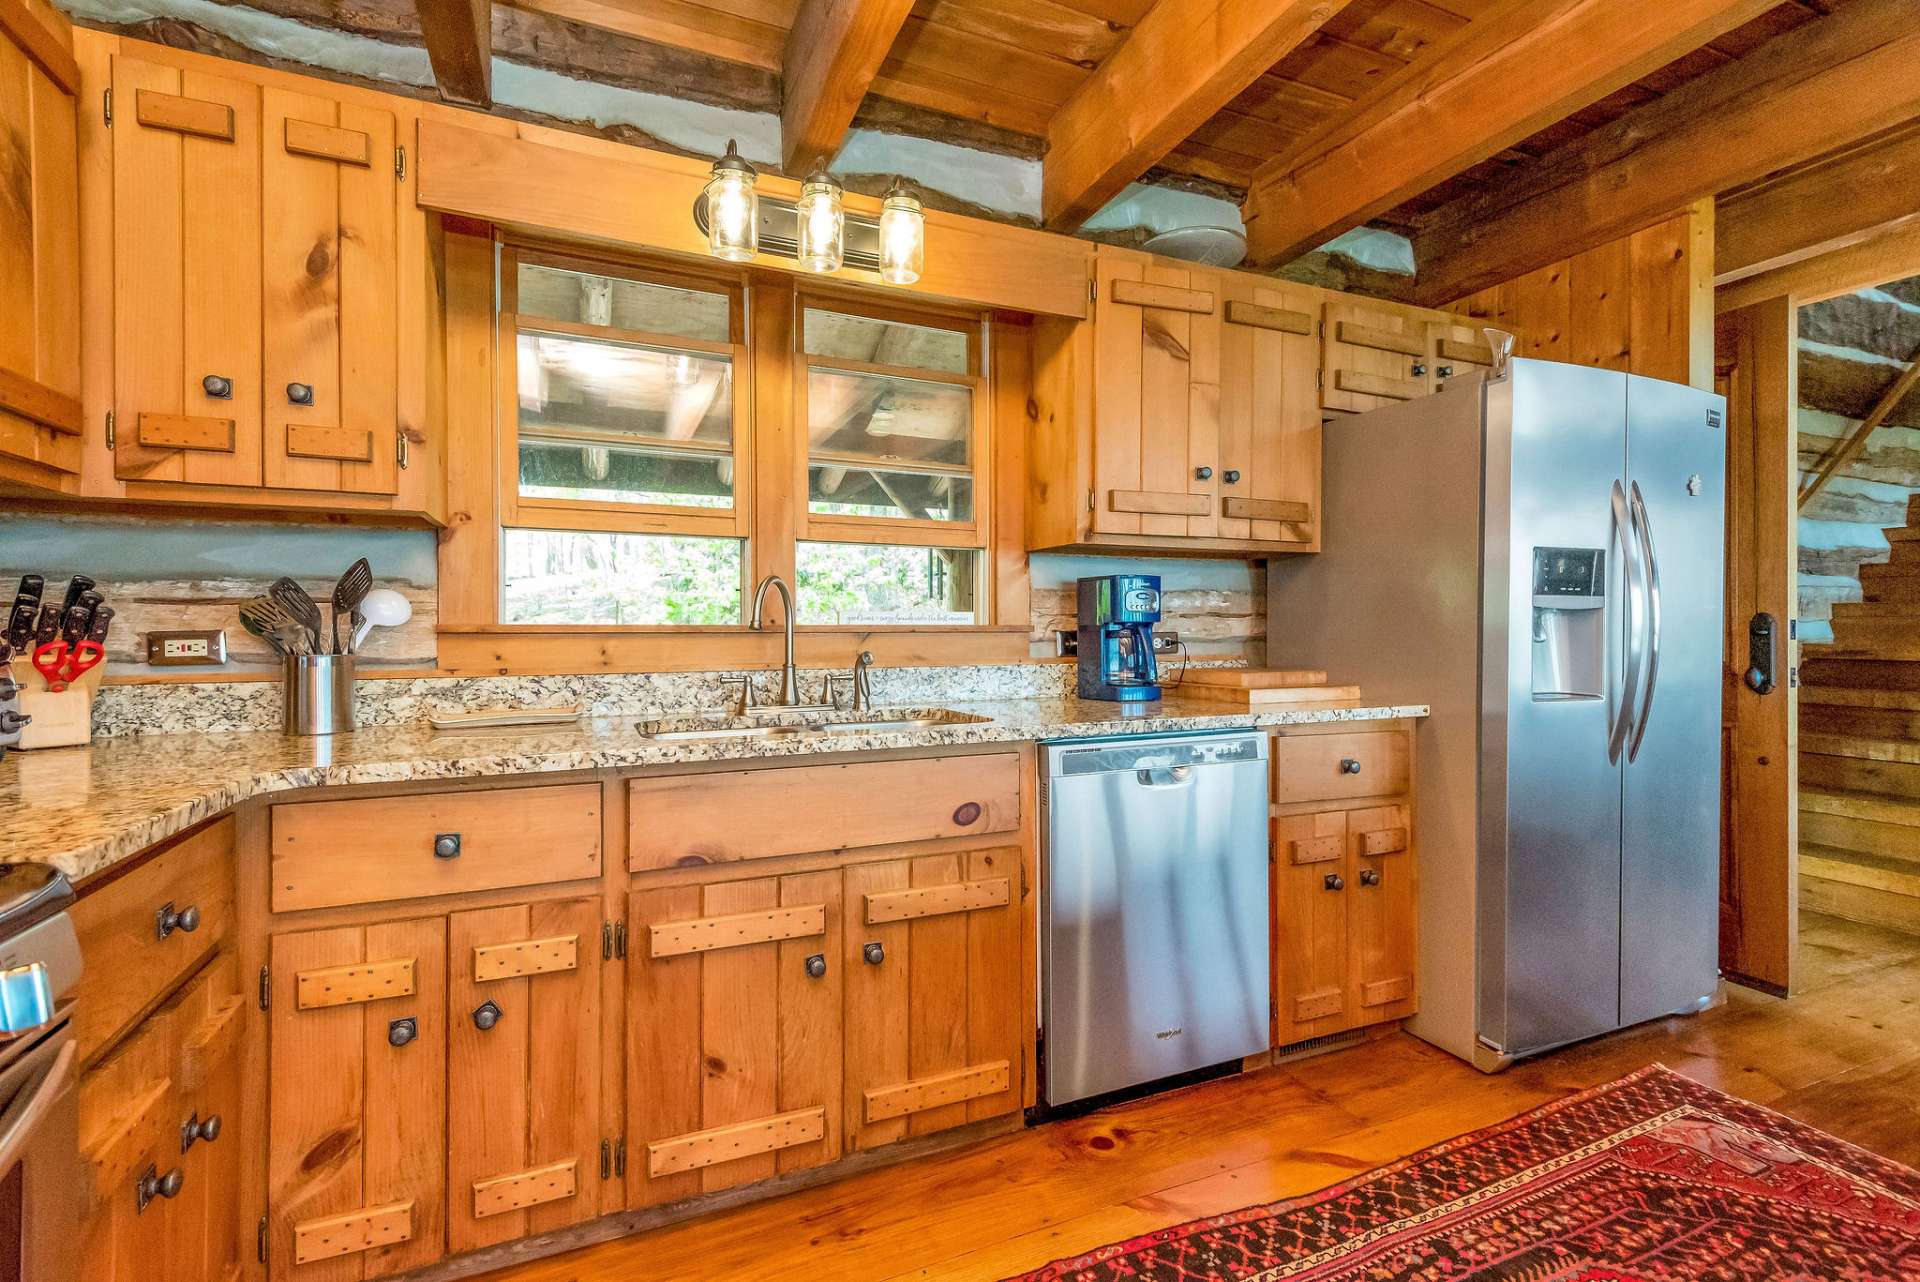 Chef's kitchen features granite countertops, stainless appliances, ample storage & counter space.